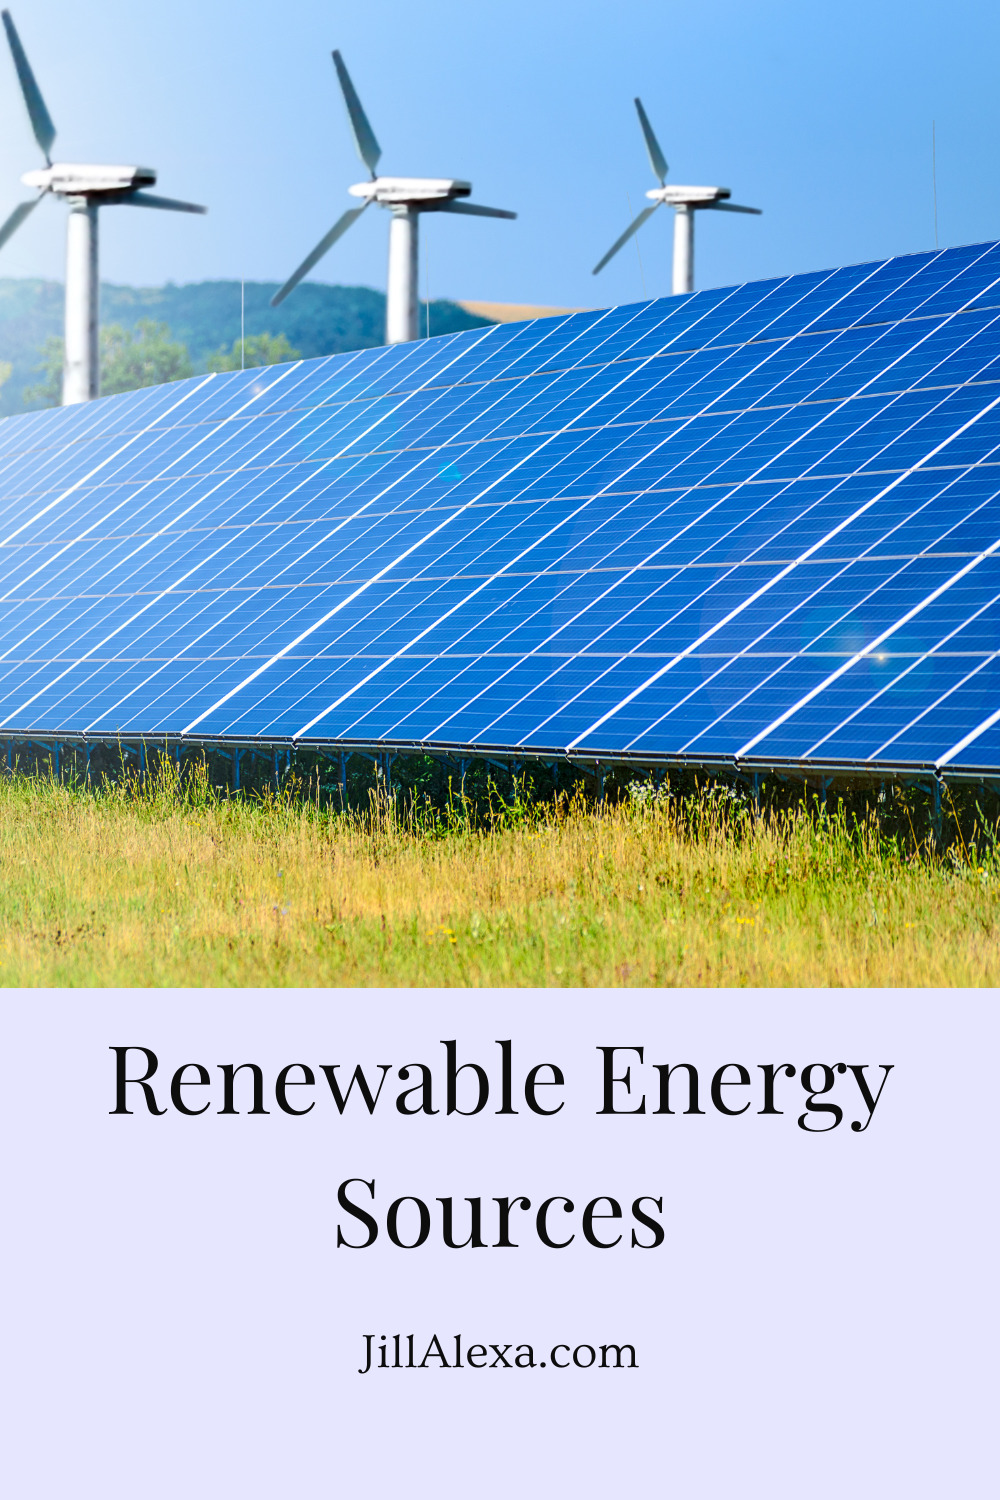 Four Top Renewable Energy Sources to Power Your Home | Renewable Energy Sources